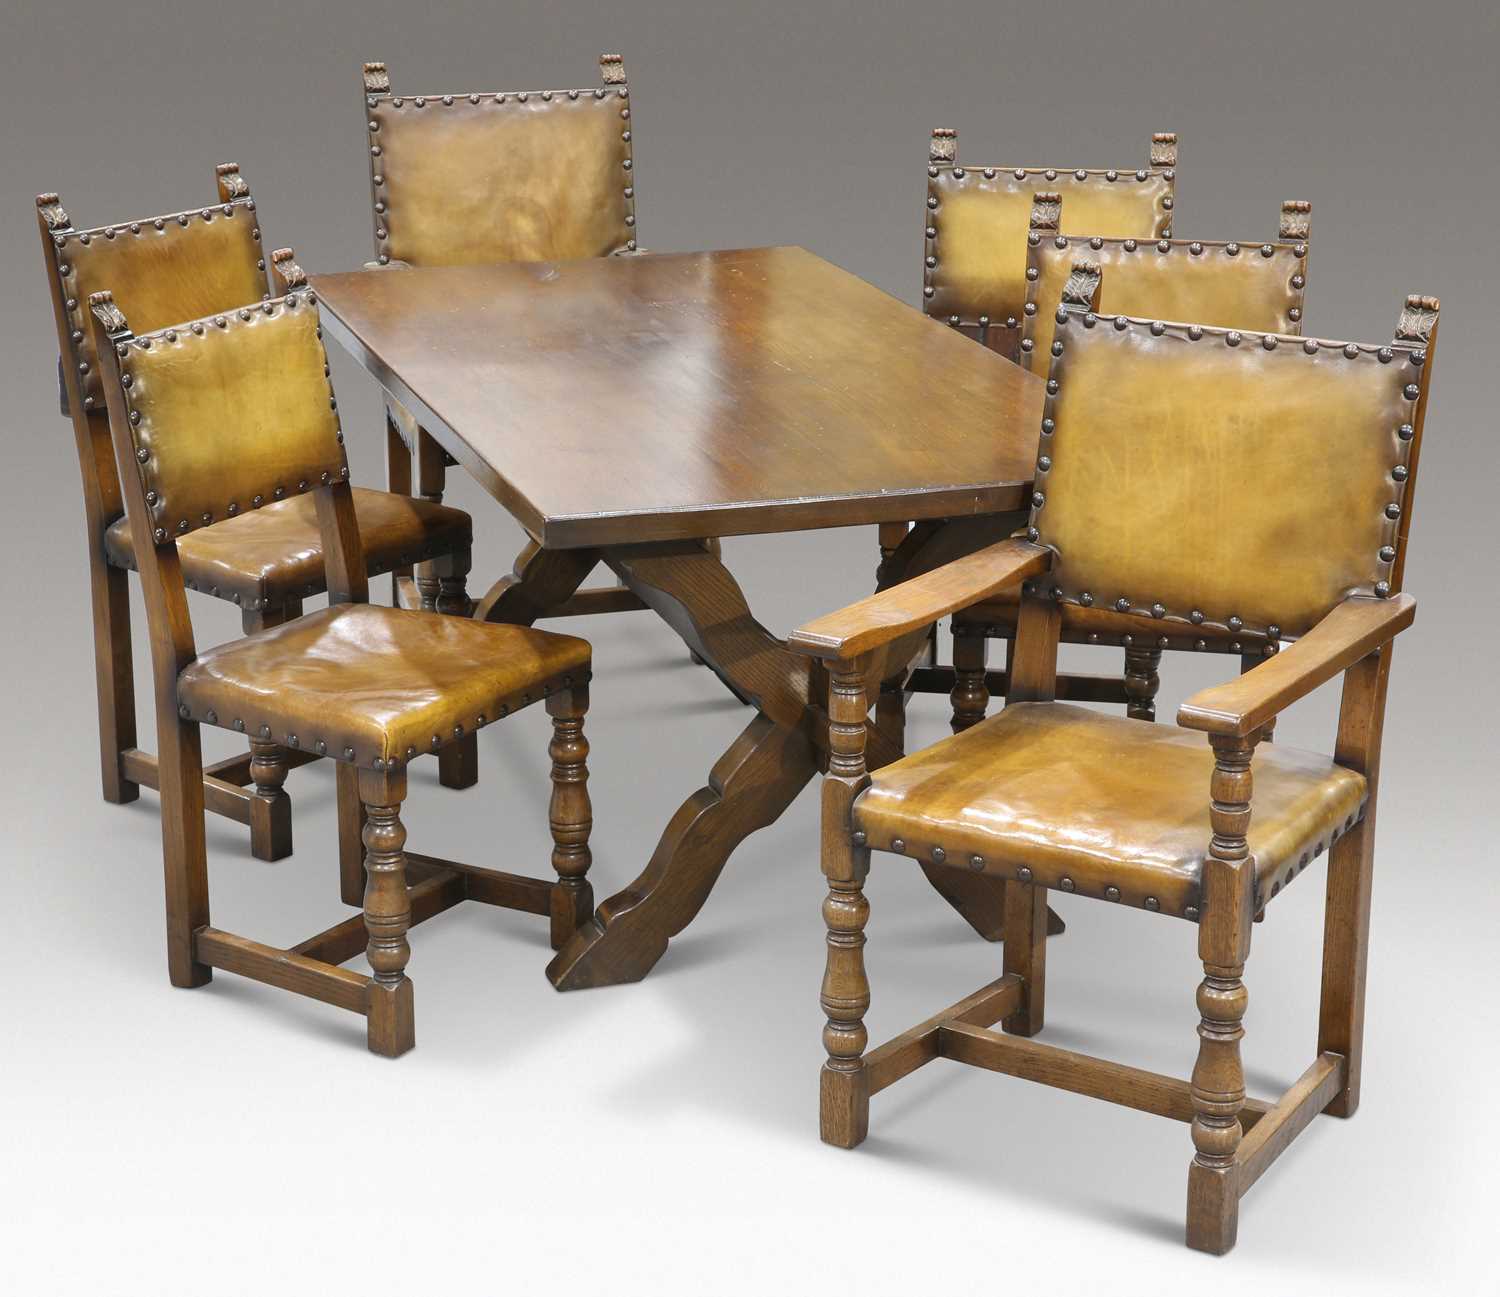 A PERIOD STYLE OAK REFECTORY DINING TABLE AND SIX CHAIRS